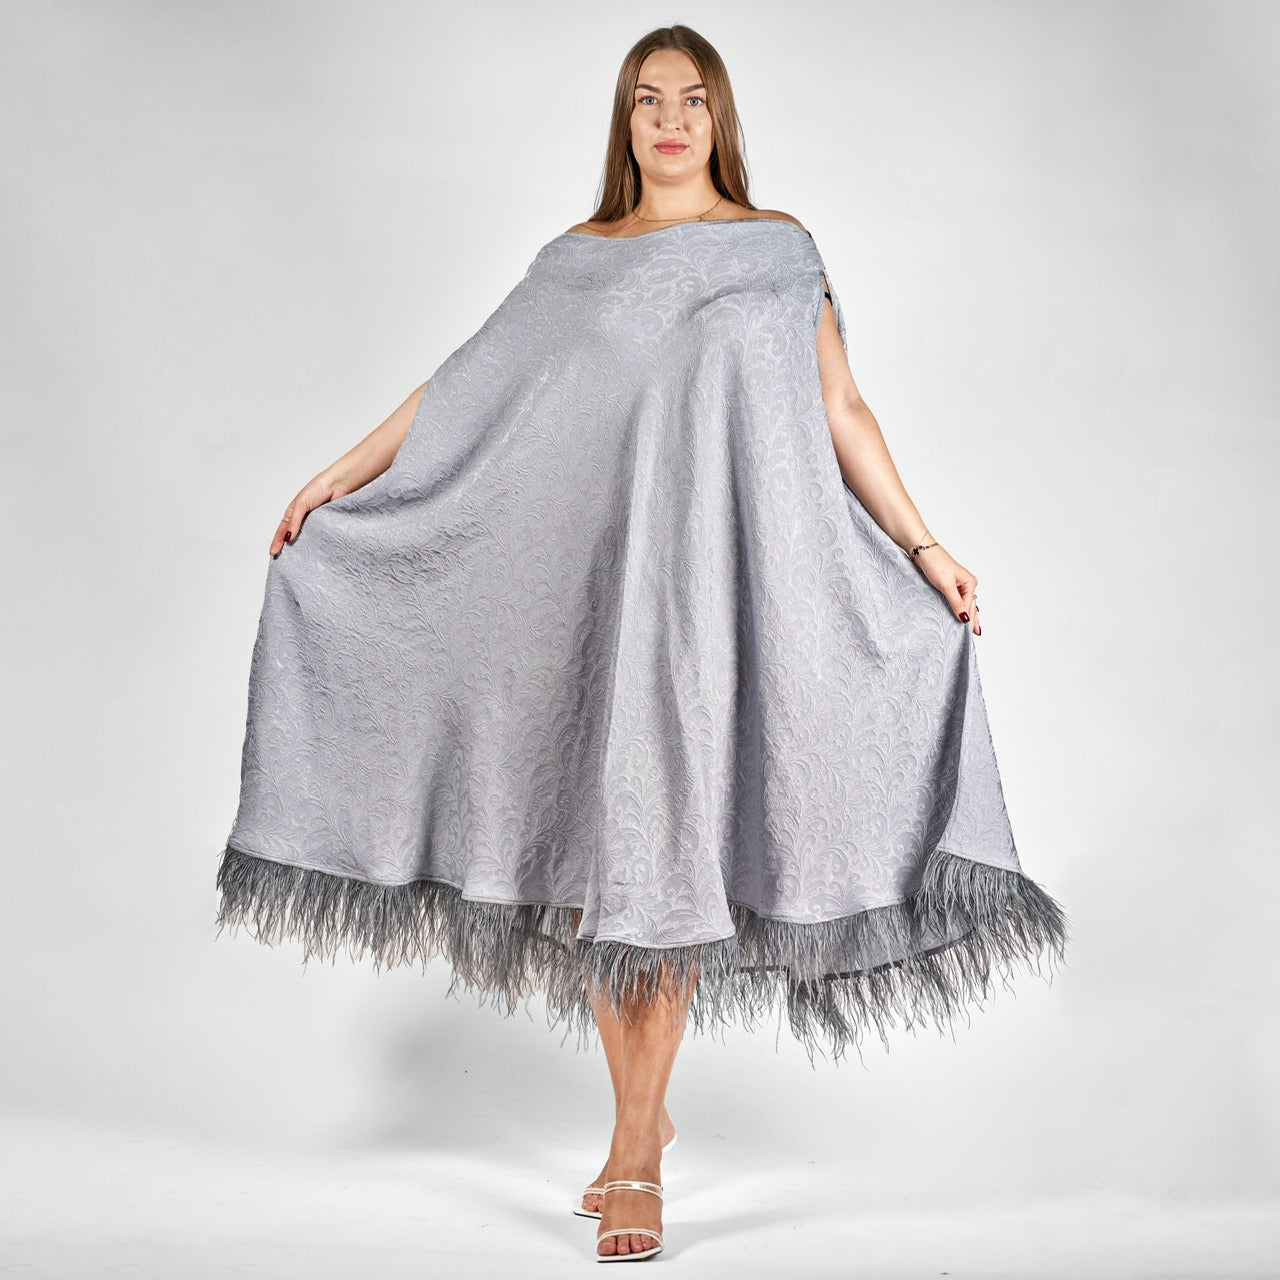 Soft grey dress with feathers - 3